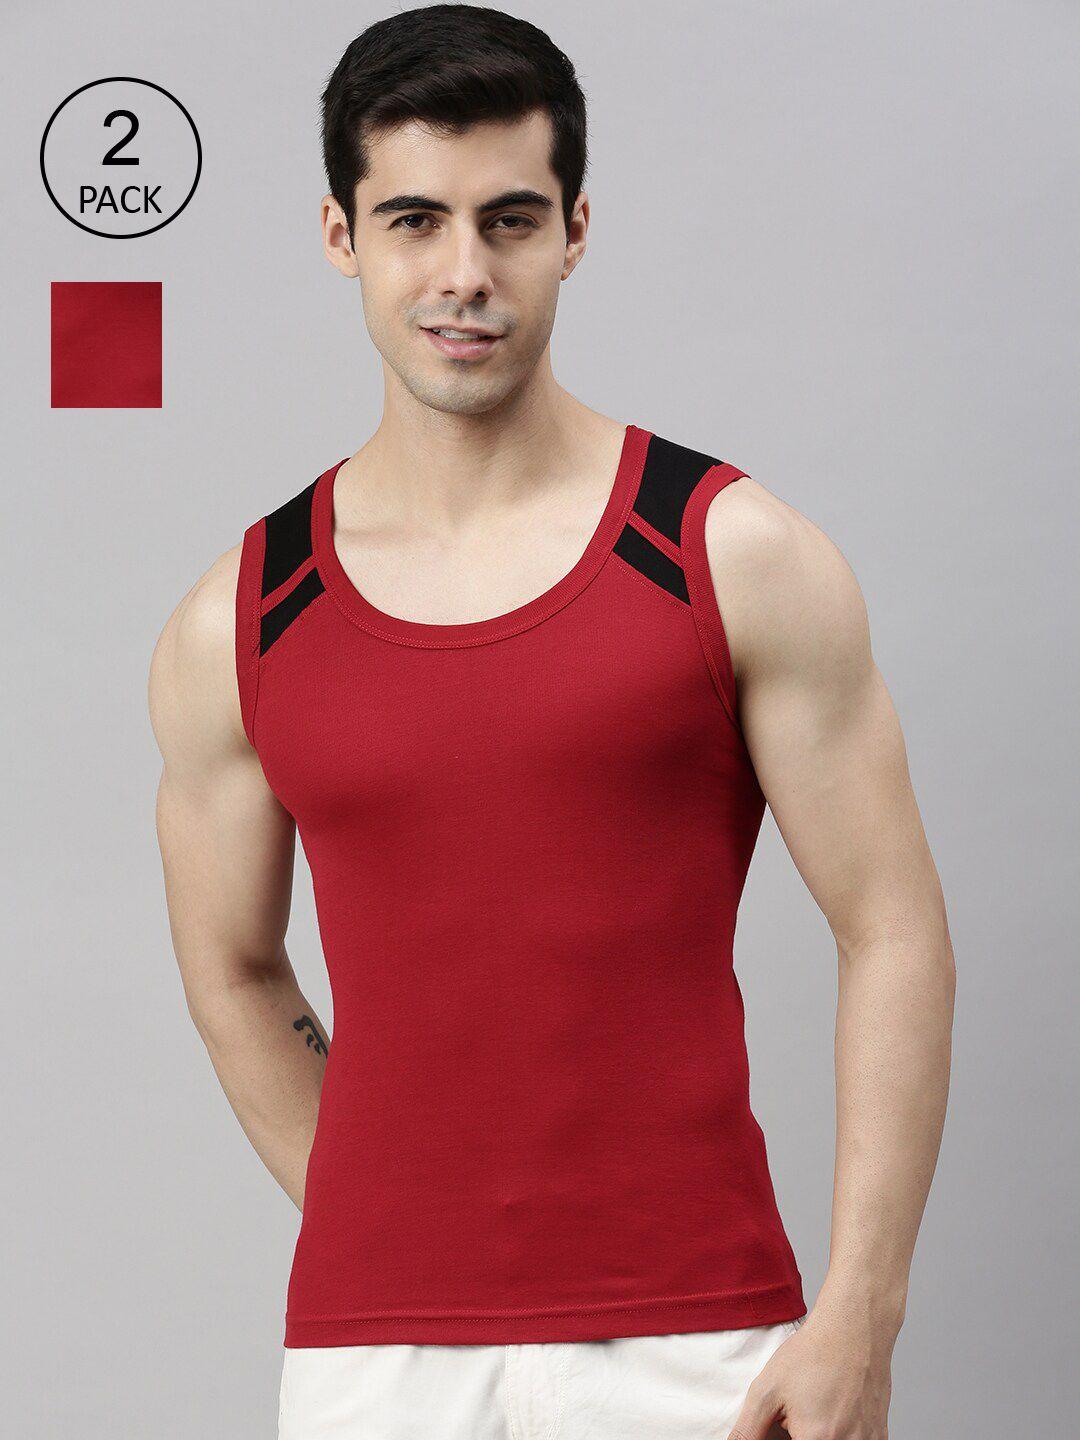 lux-cozi-men-pack-of-2-red-solid-gym-innerwear-vests